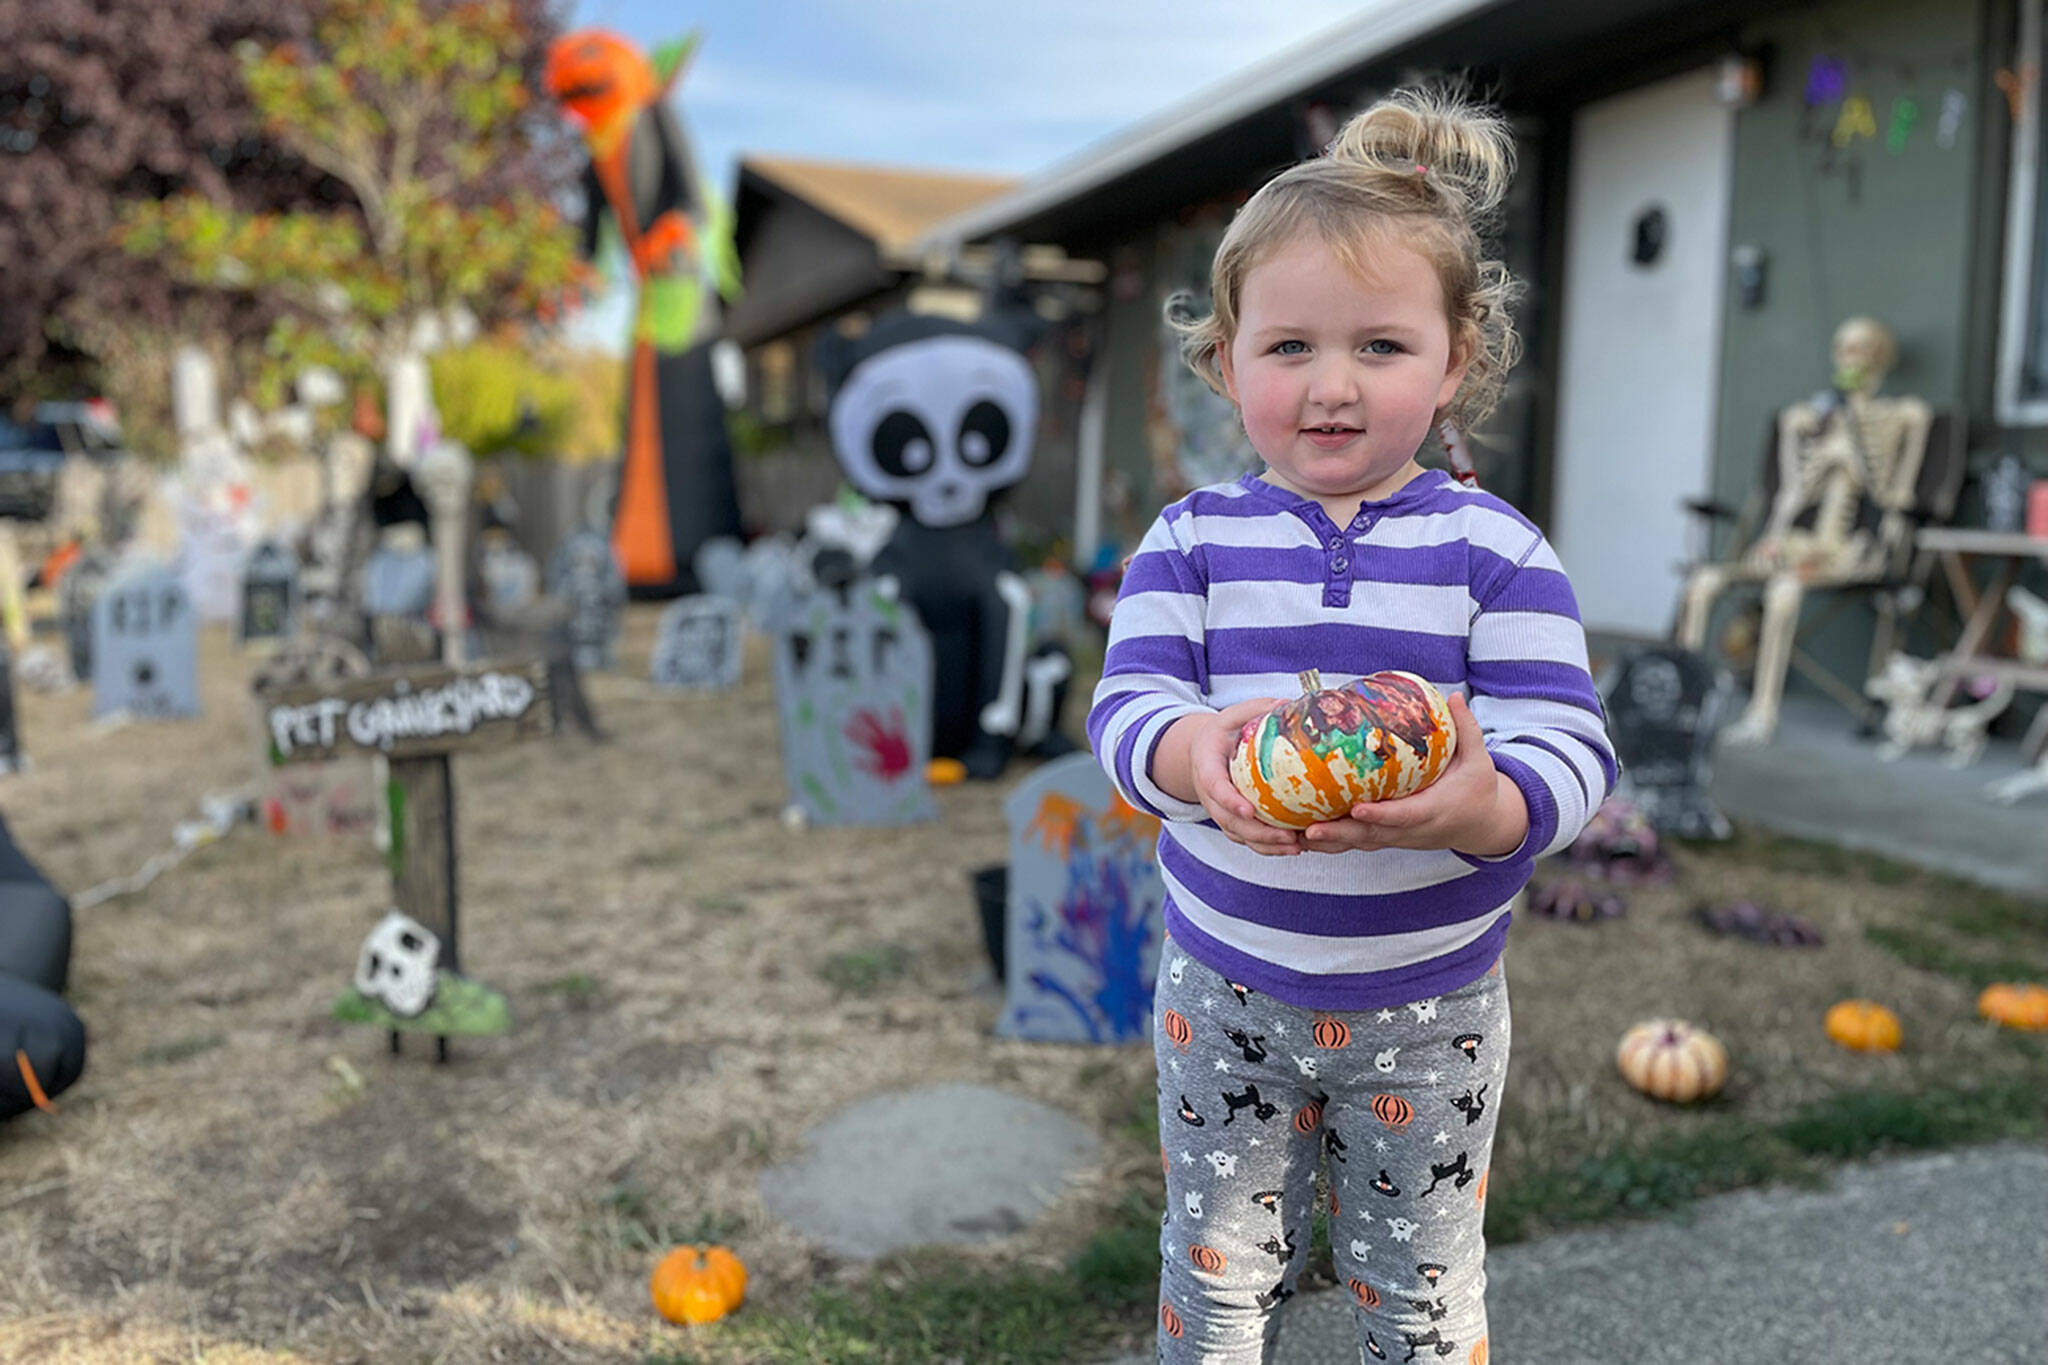 Sequim Gazette photo by Matthew Nash
Holding one of many hand painted pumpkins, 2-and-a-half-year-old Parker Lomker stands beside her downtown Sequim yard where decorations are placed everywhere for Halloween. The family will set up lights, smoke and music on Halloween for trick-or-treaters at their home on the 200 block of West Prairie Street.